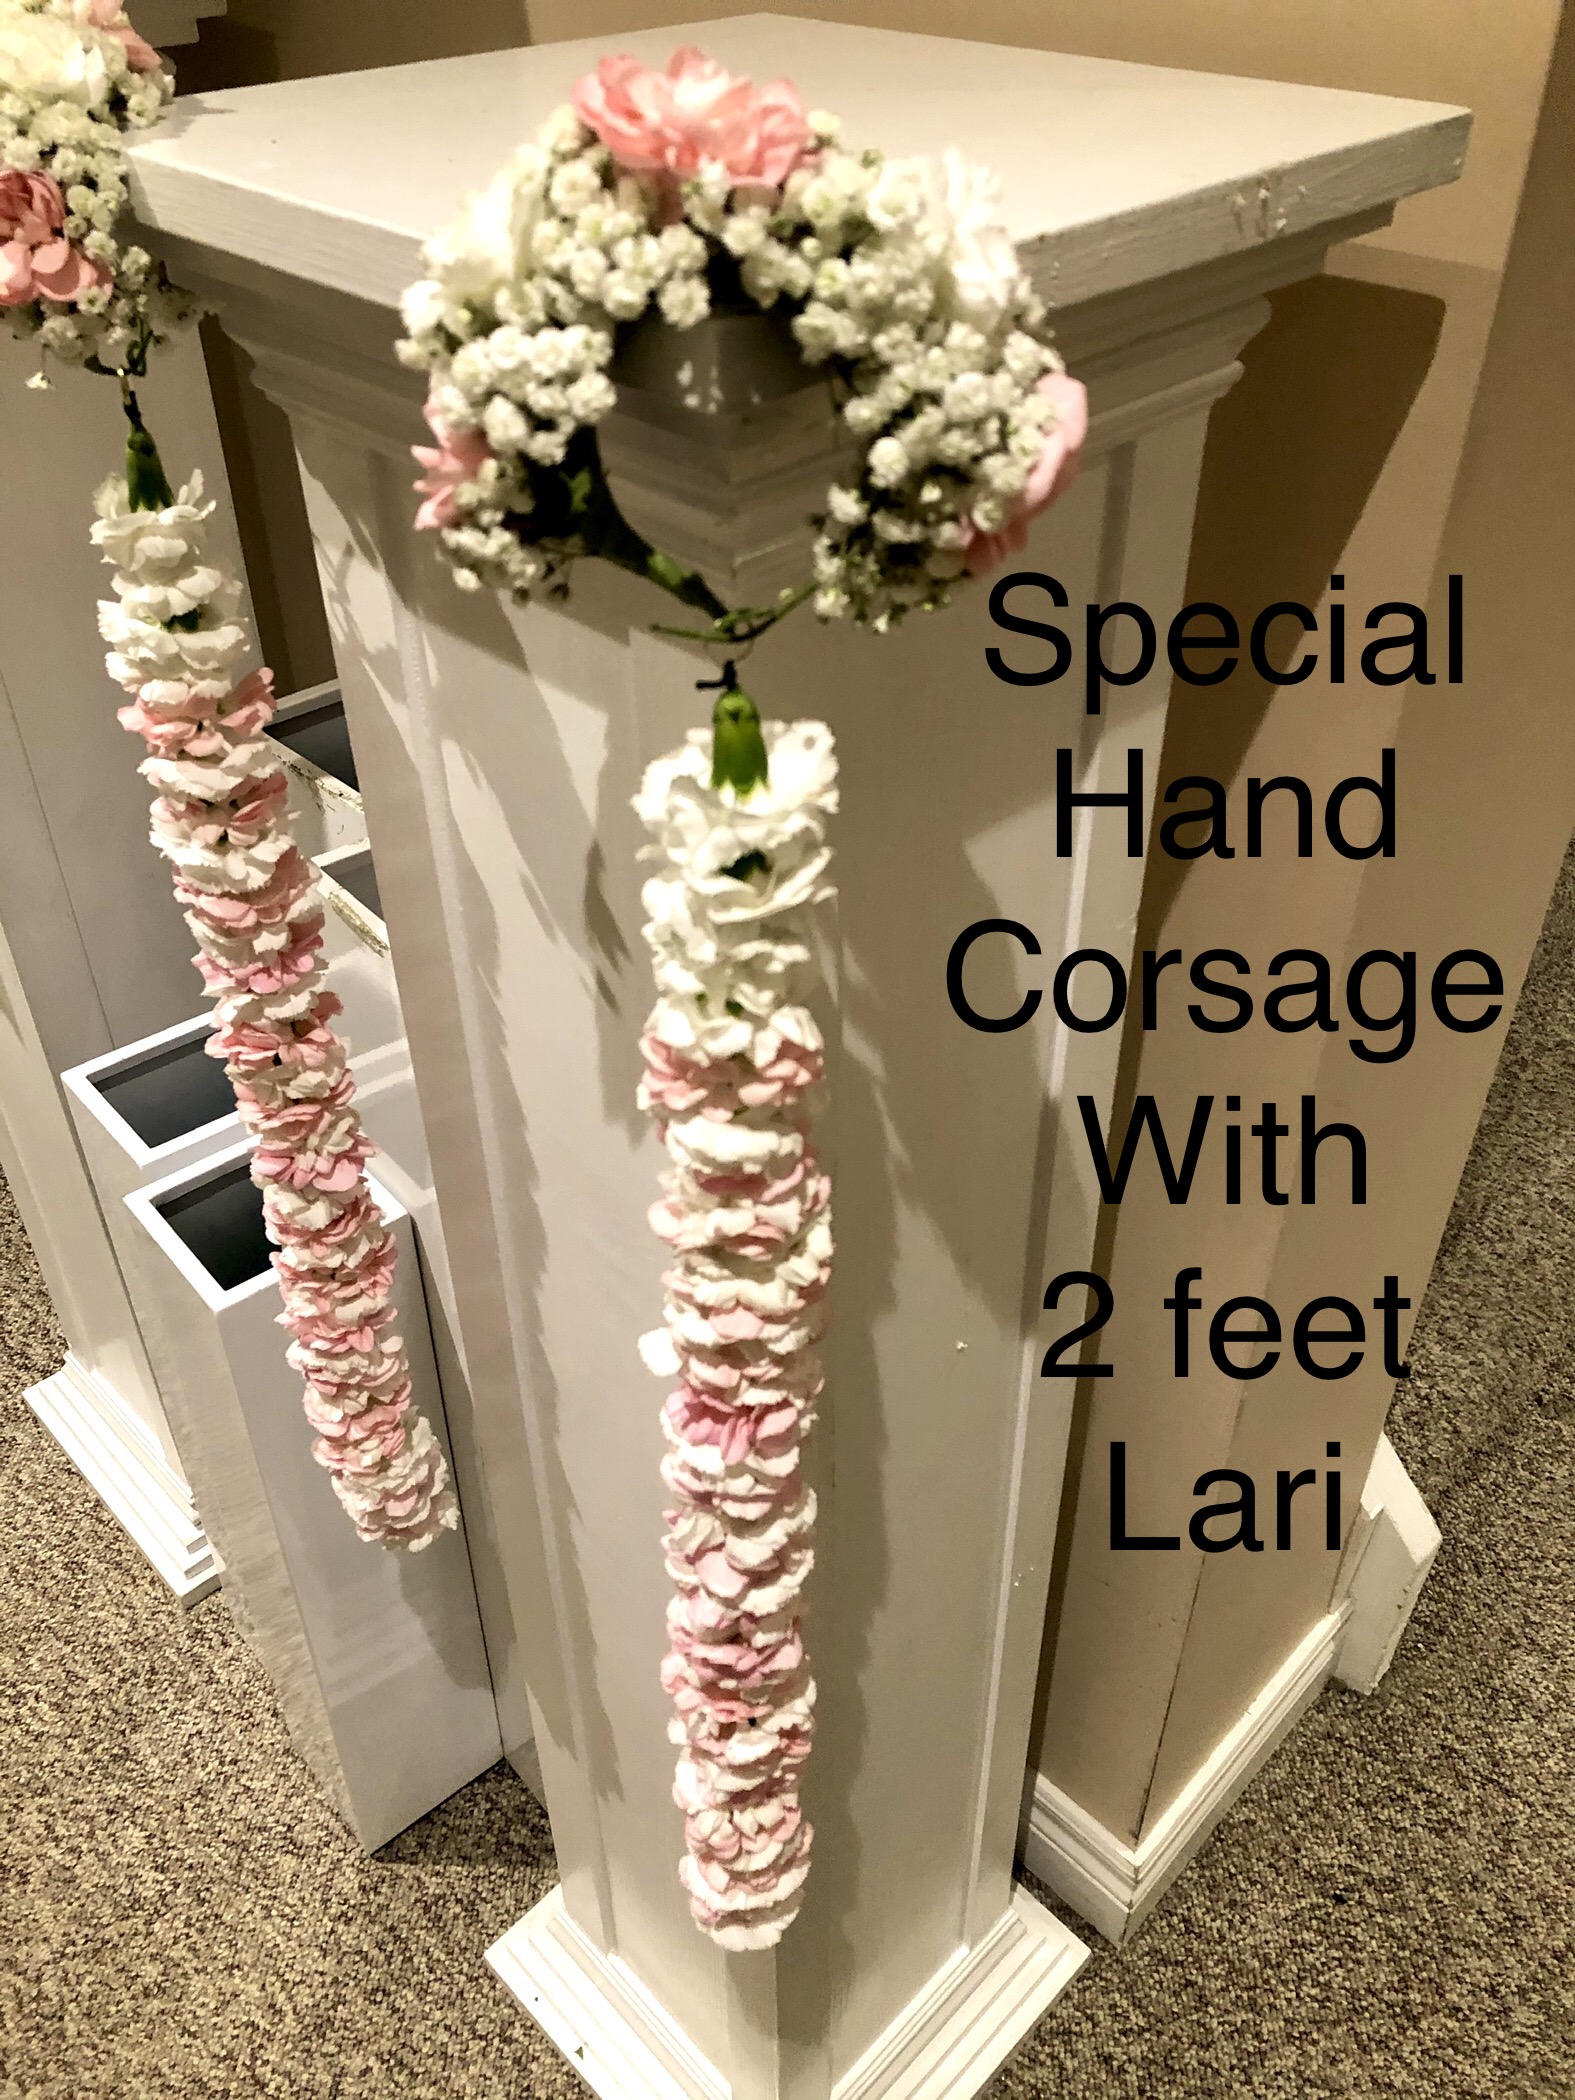 Special Hand Corsage with 2 feet lari 